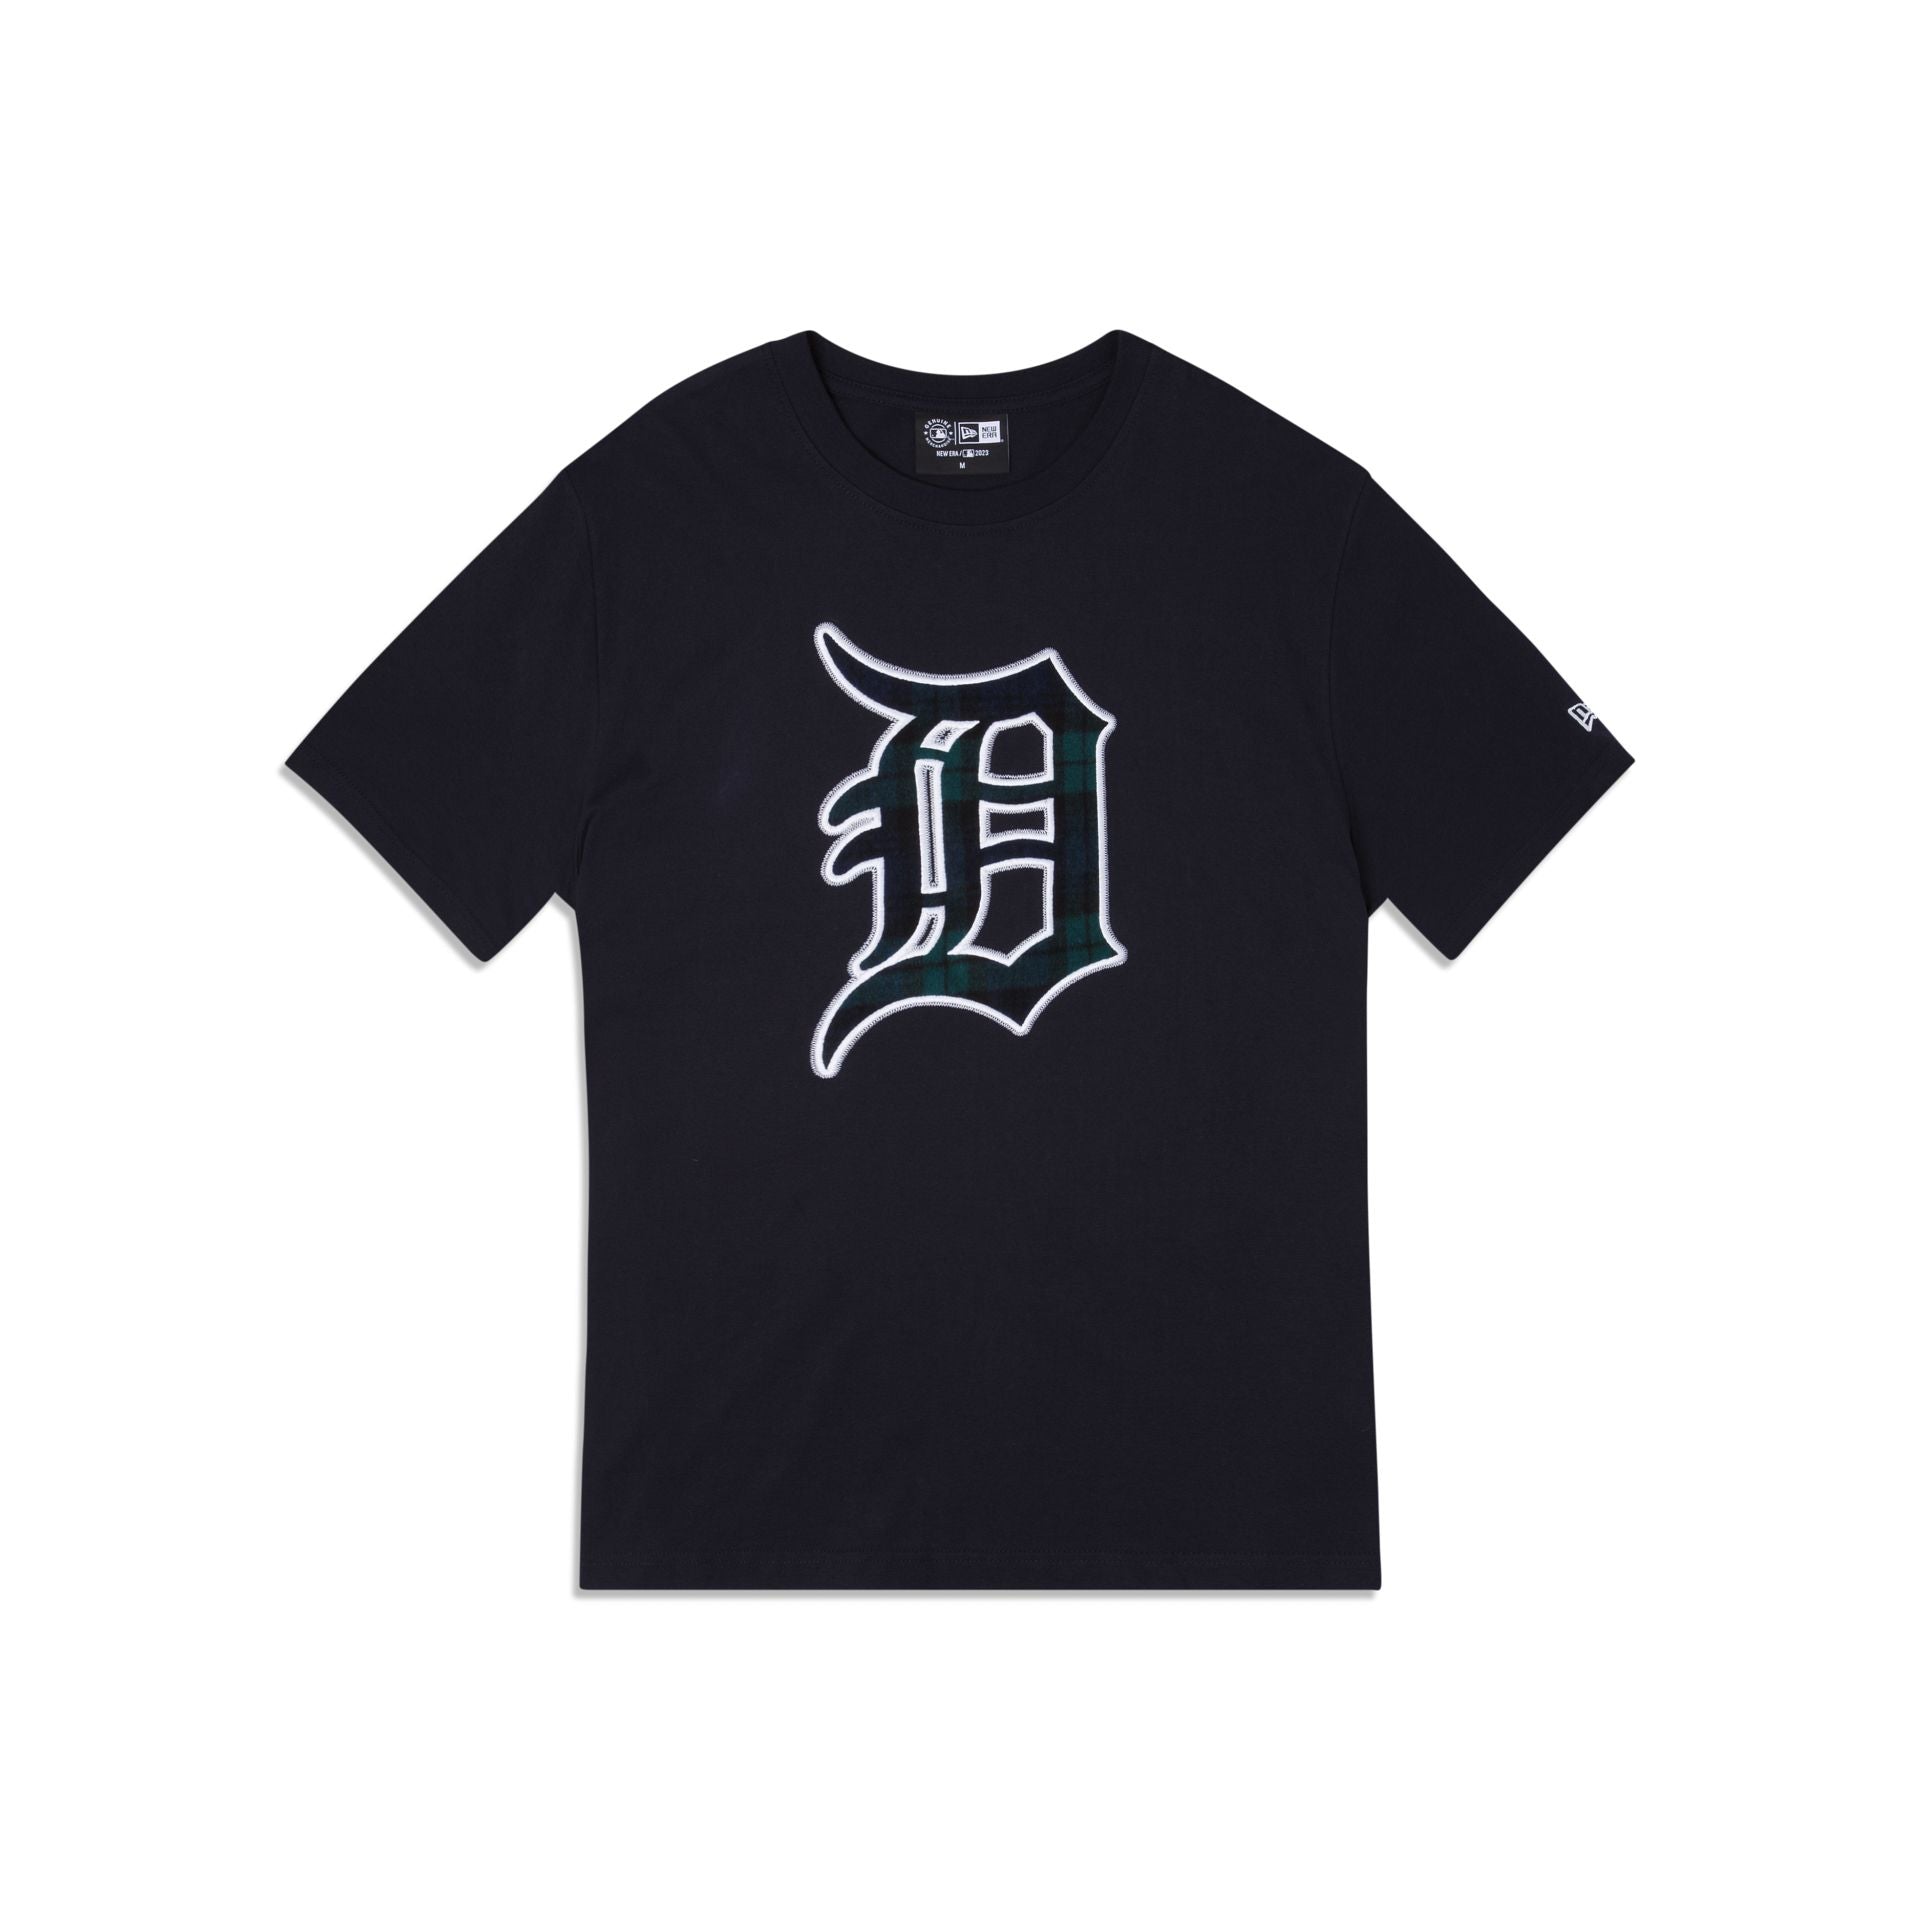 Detroit Tigers Best Dad Ever Logo Father's Day Shirt